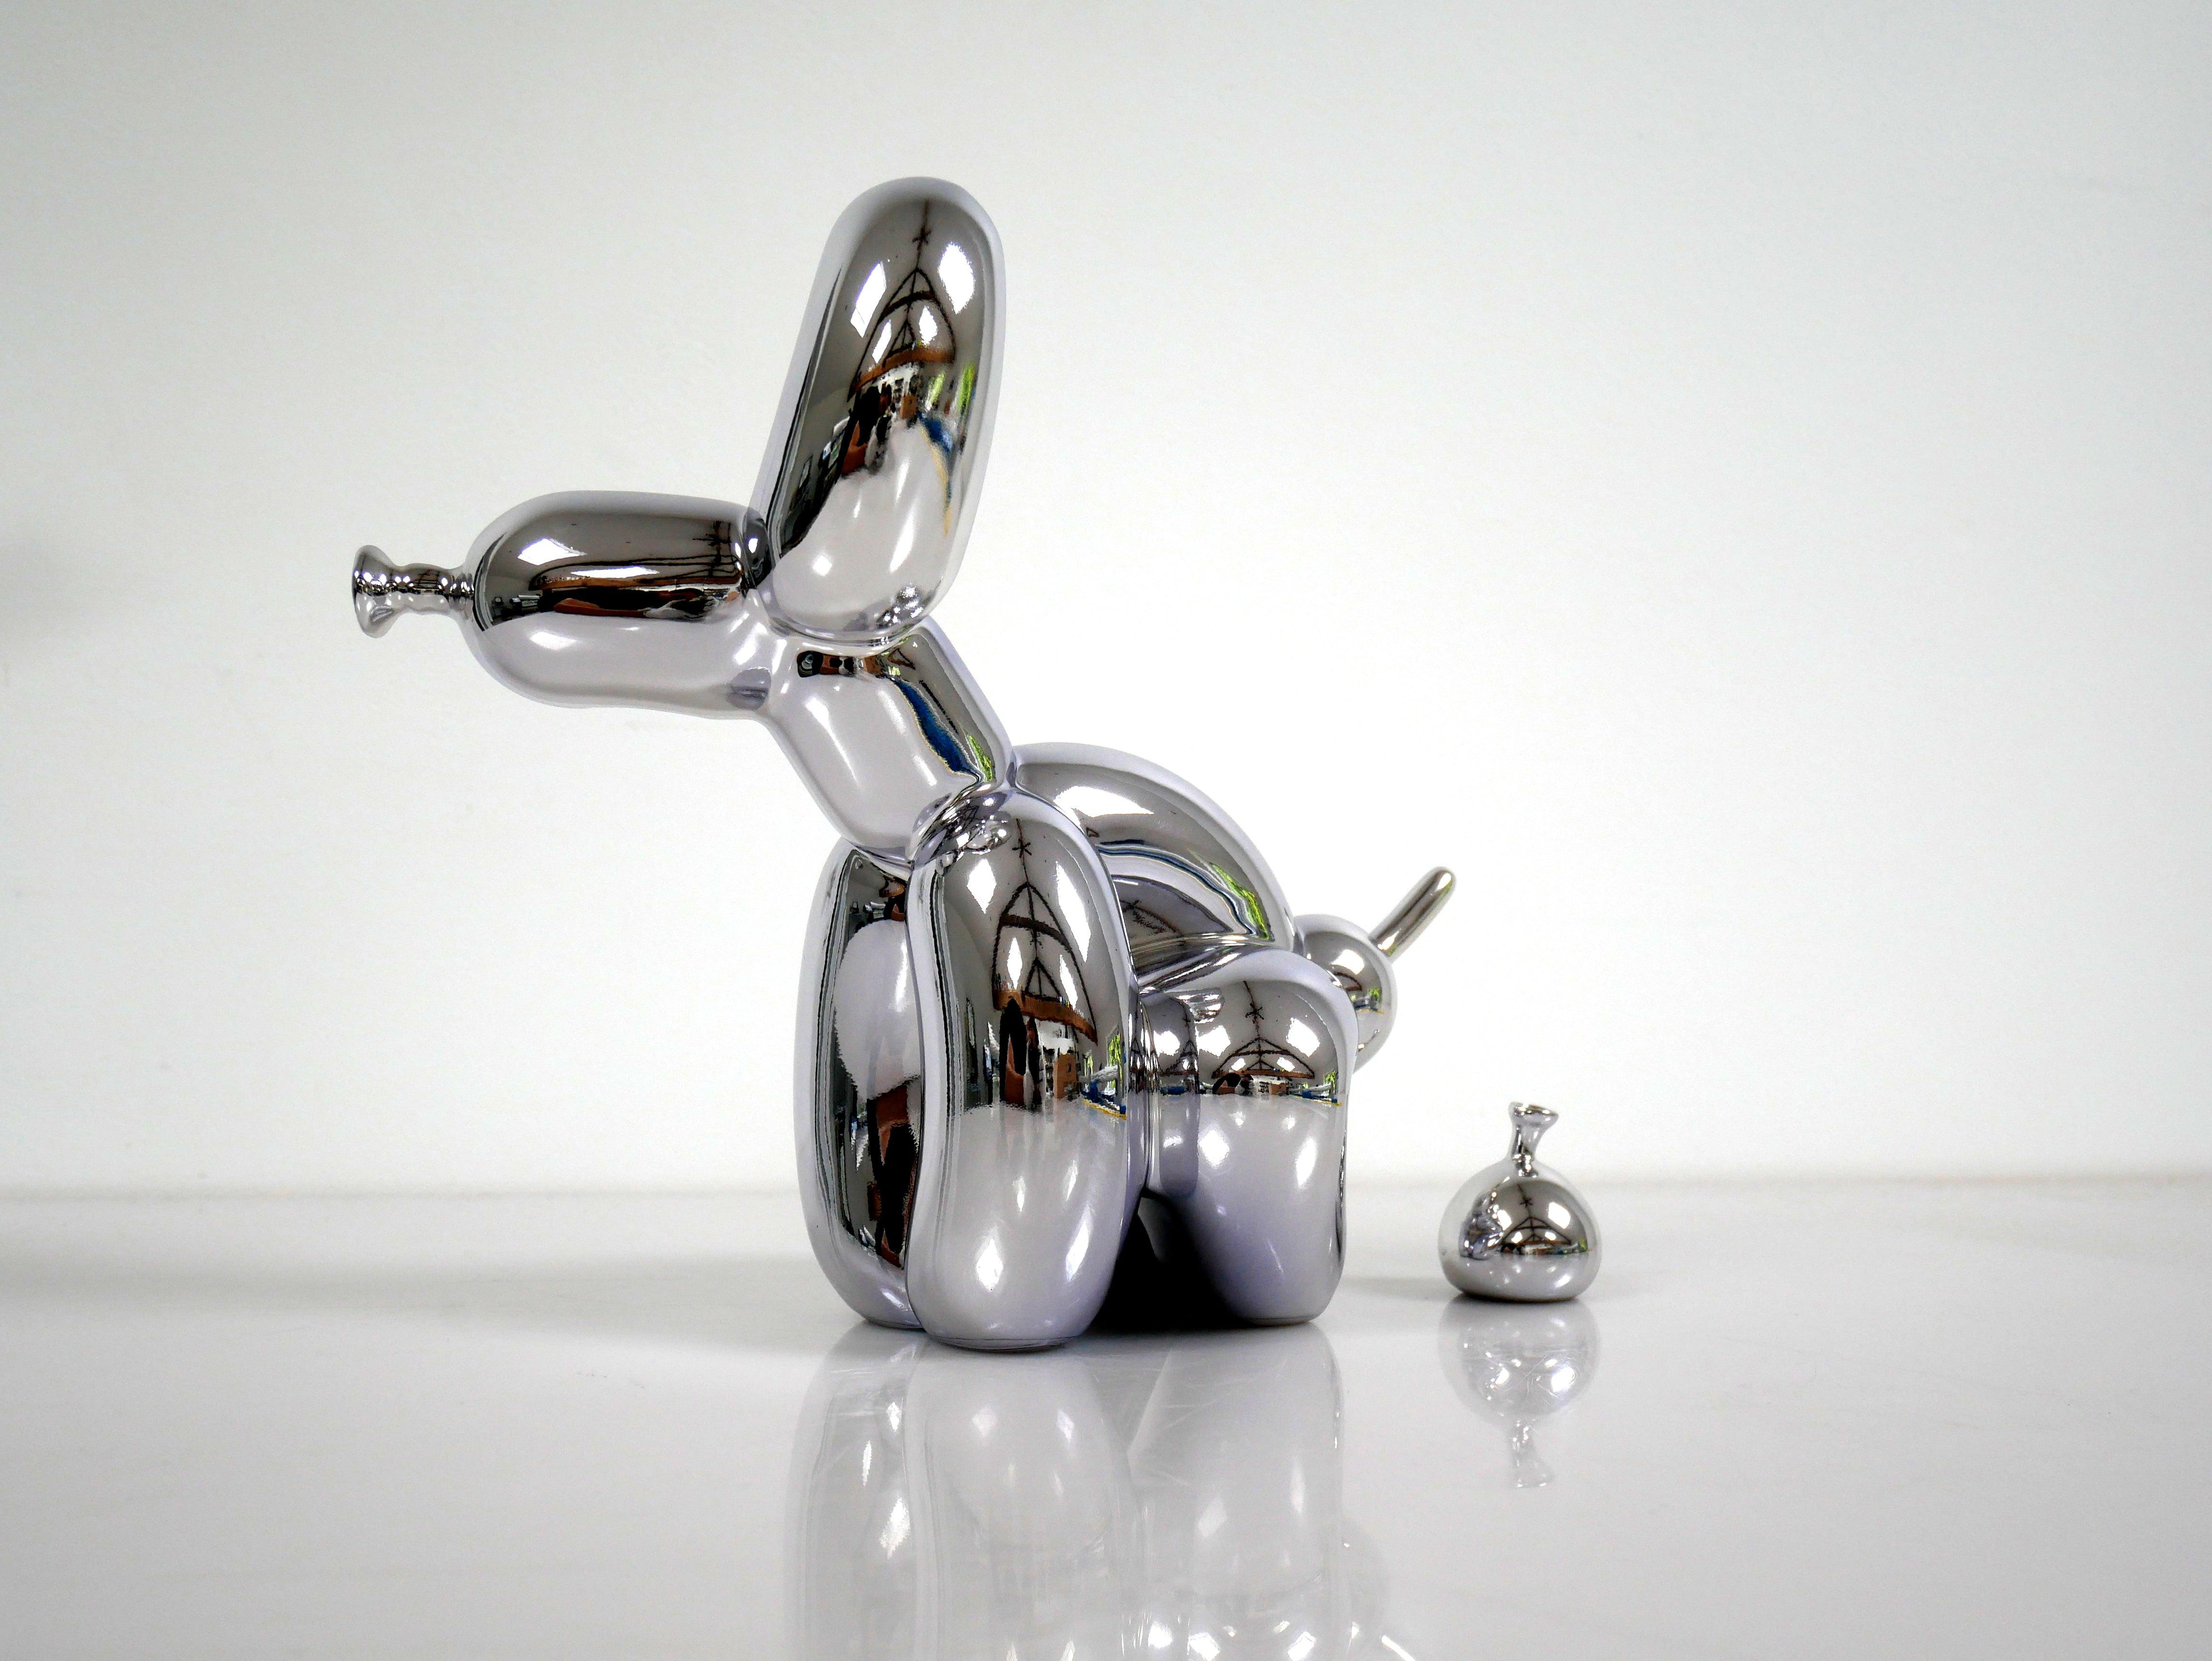 Sculpture Popek Chrome Porcelain Edition by WHASTHISNAME ArtAndToys